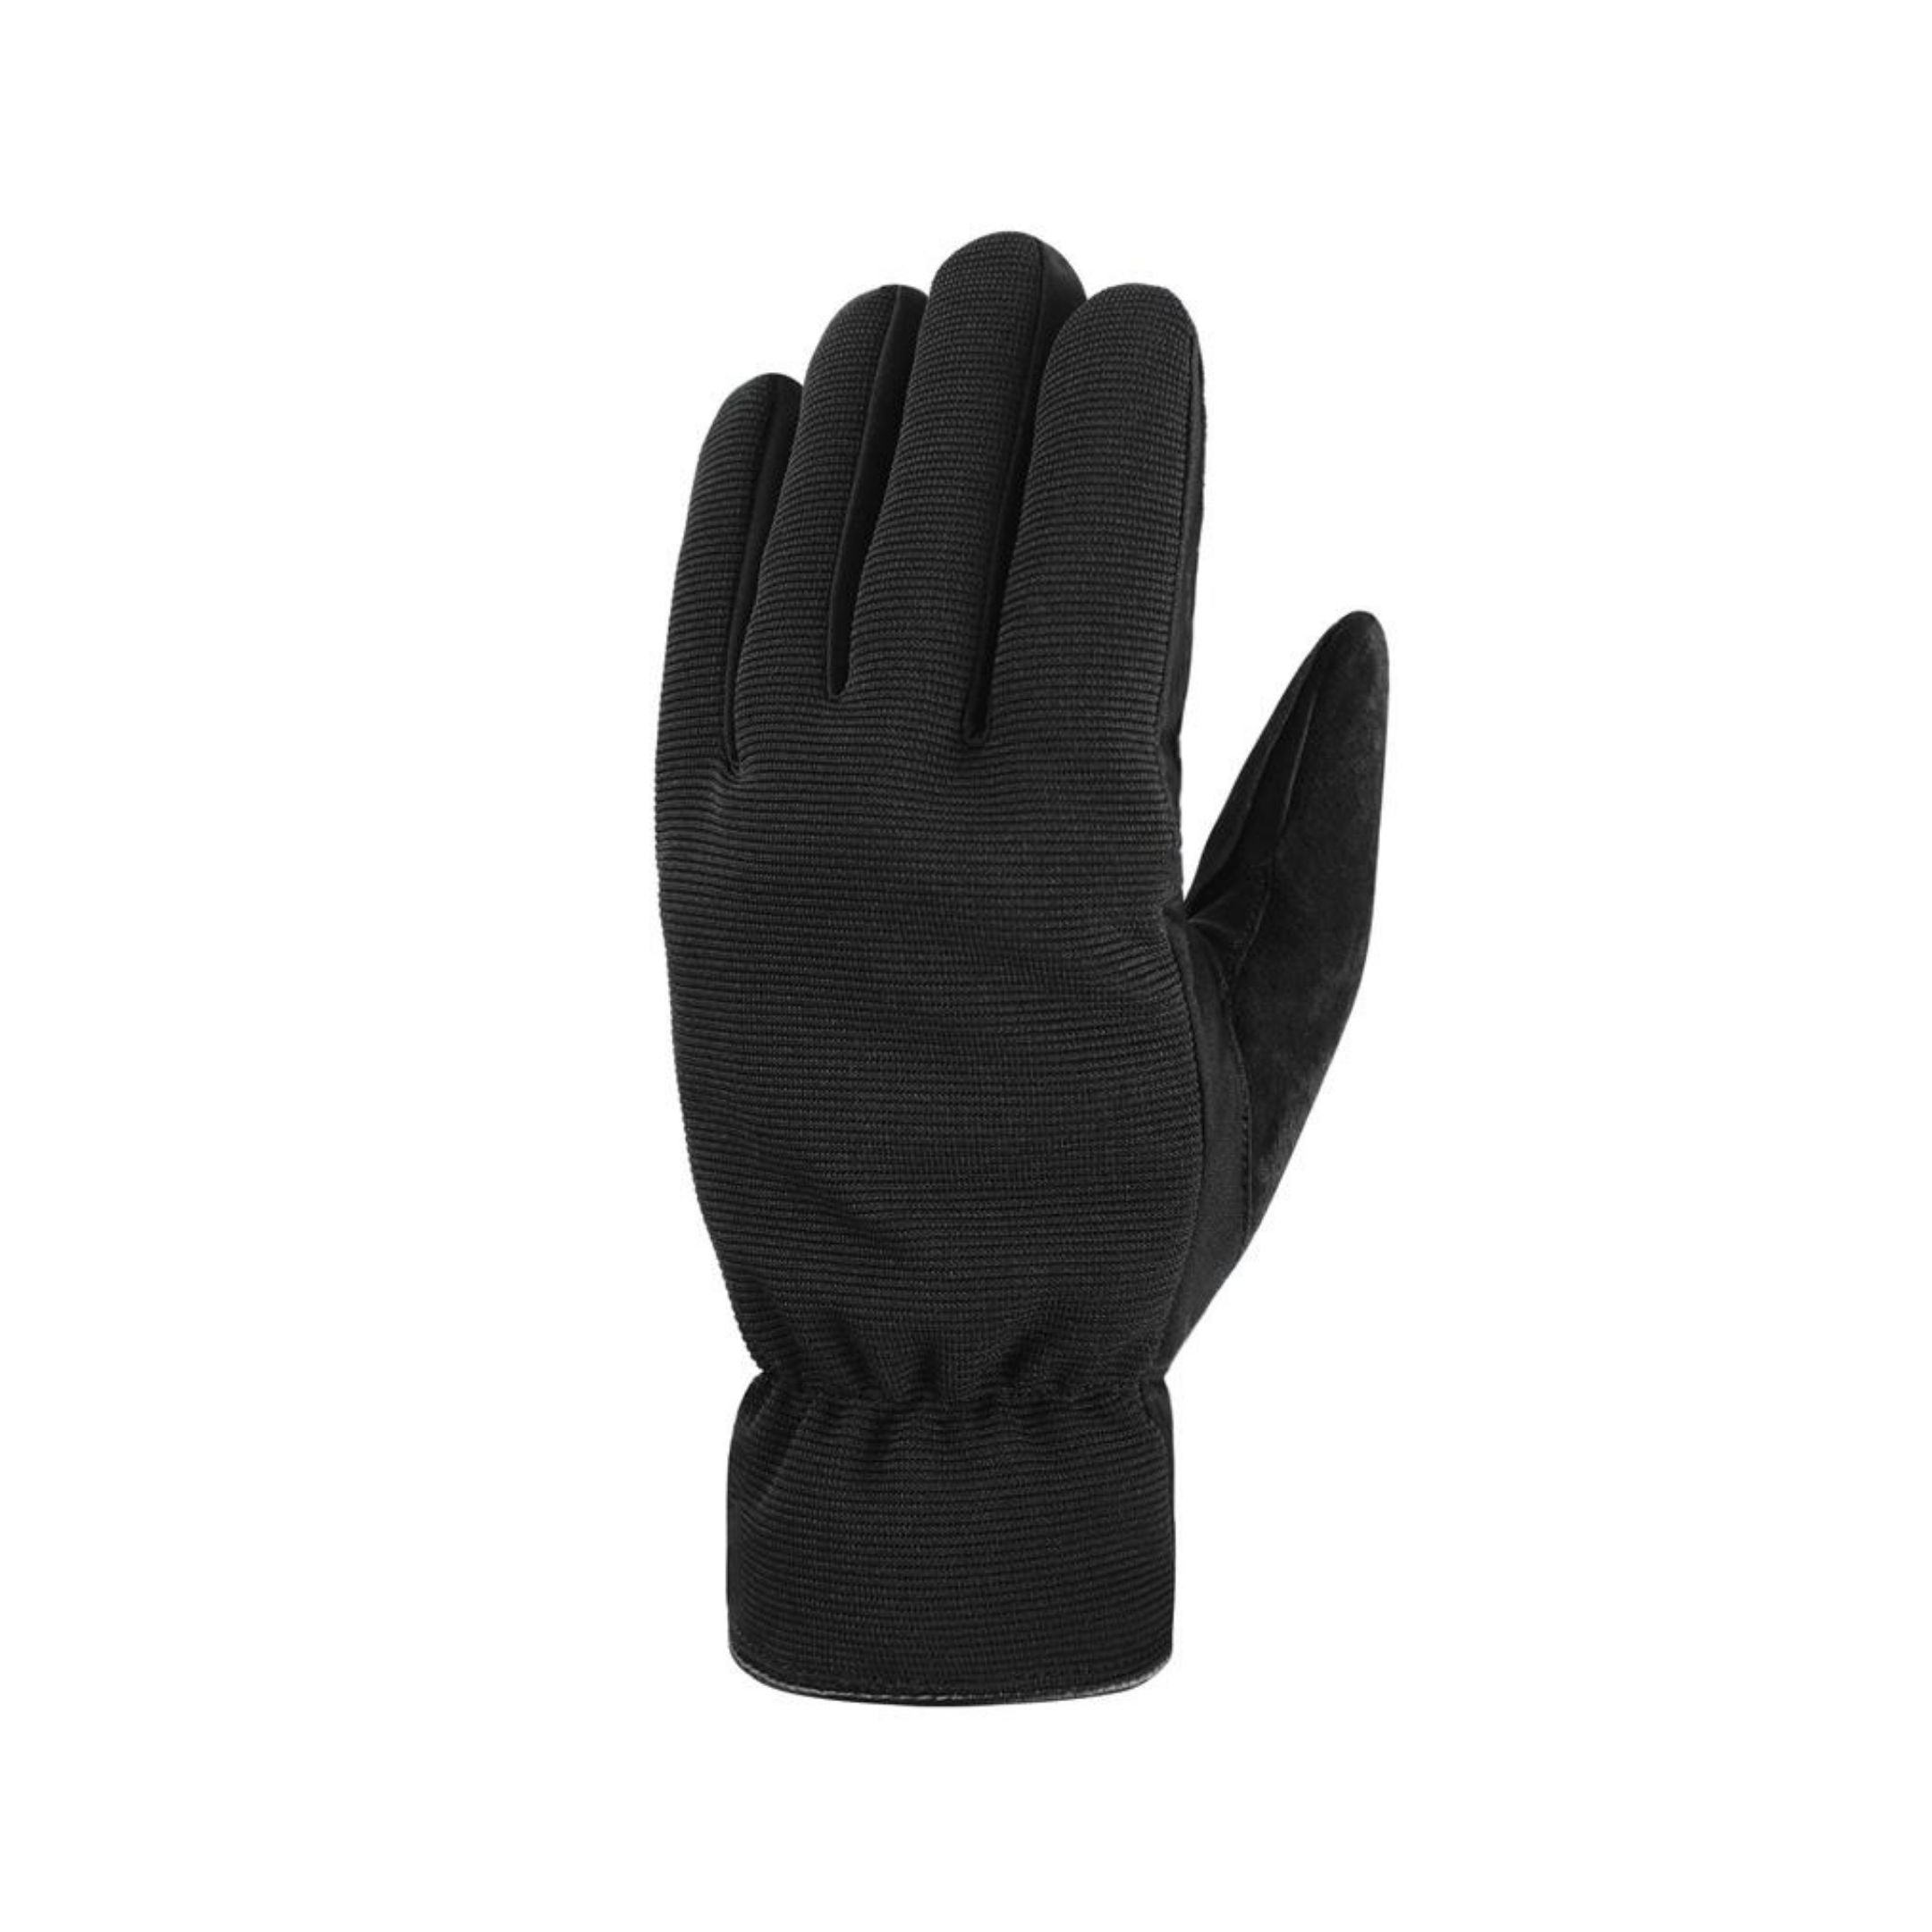 Top view of thick black textile gloves.